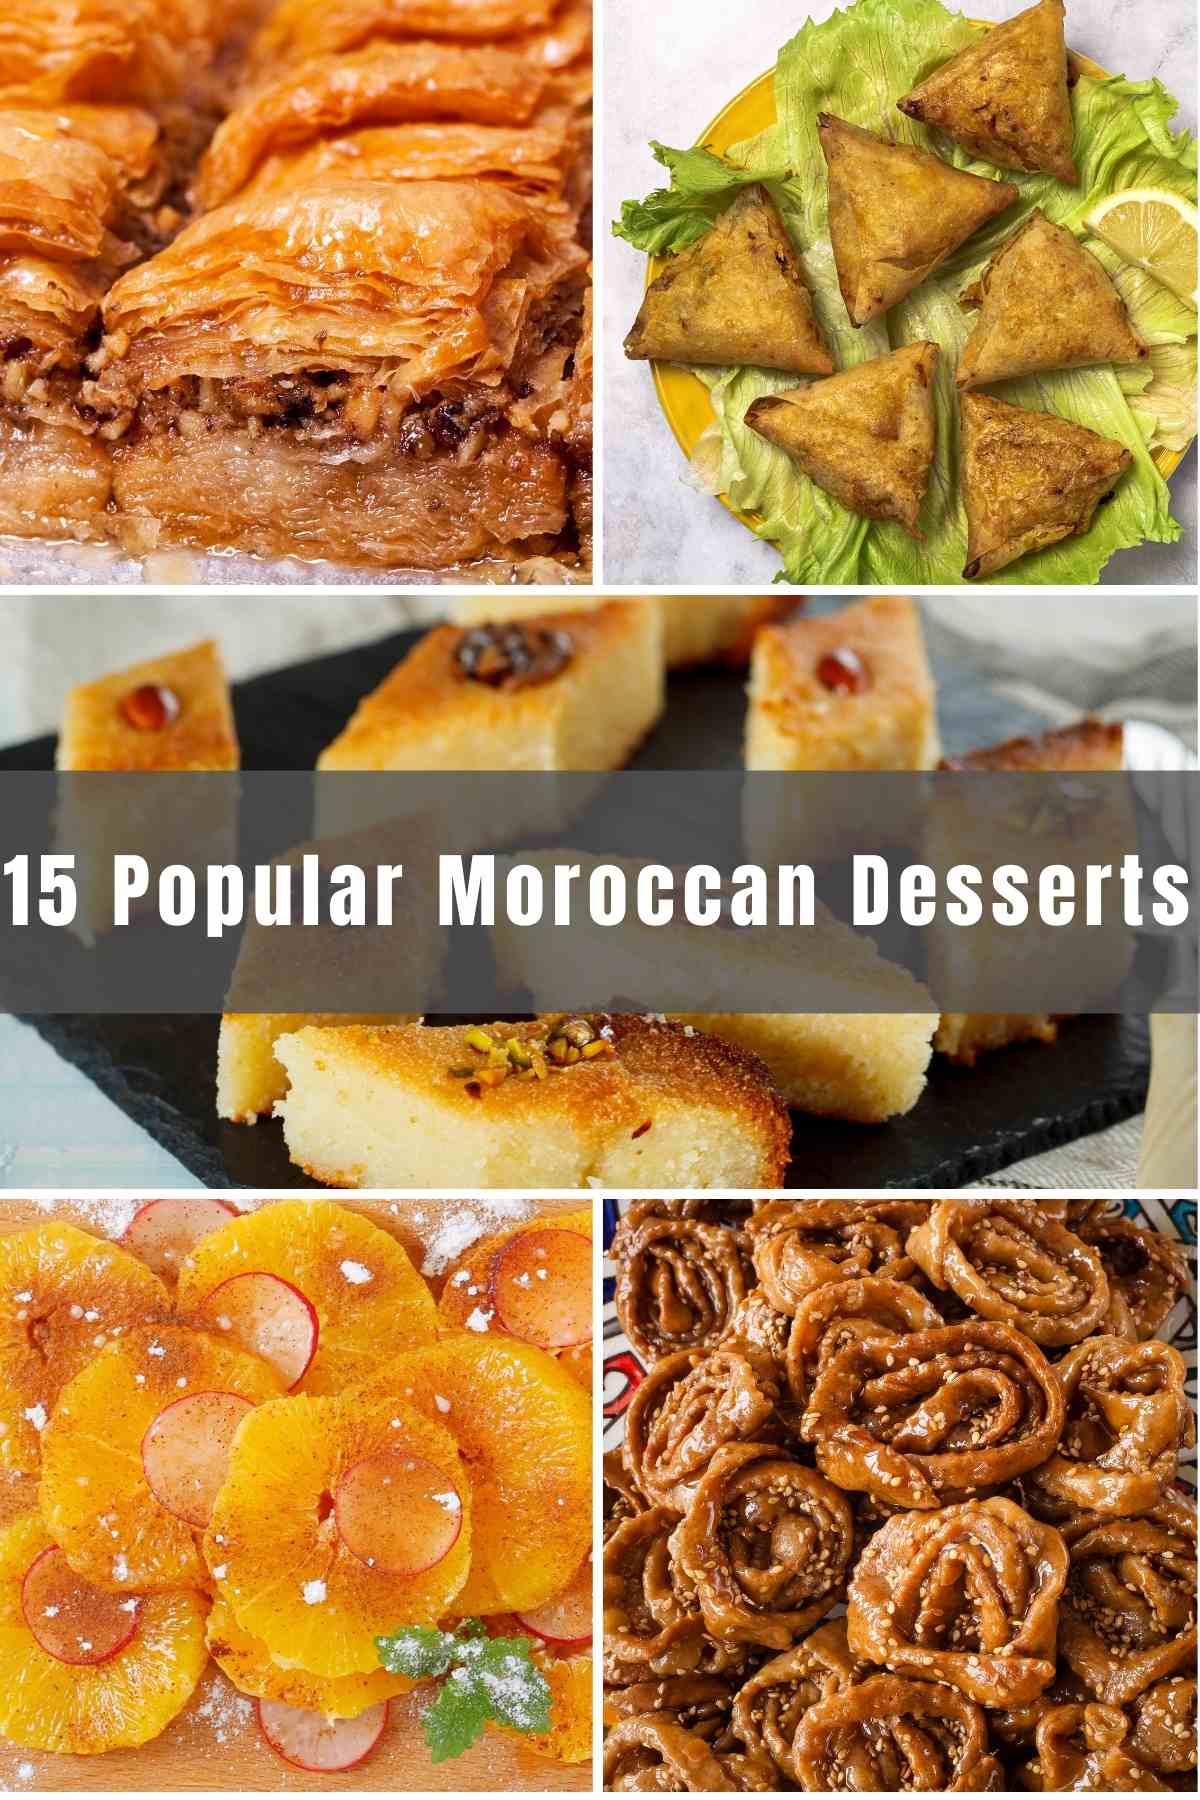 In addition to its gorgeous vistas, beautiful fabrics, and fascinating architecture, Morocco is known for its food. Your taste buds are guaranteed to come alive with the wonderful array of flavors and textures. Today we’re sharing 15 popular Moroccan Desserts for you to try in your own kitchen.